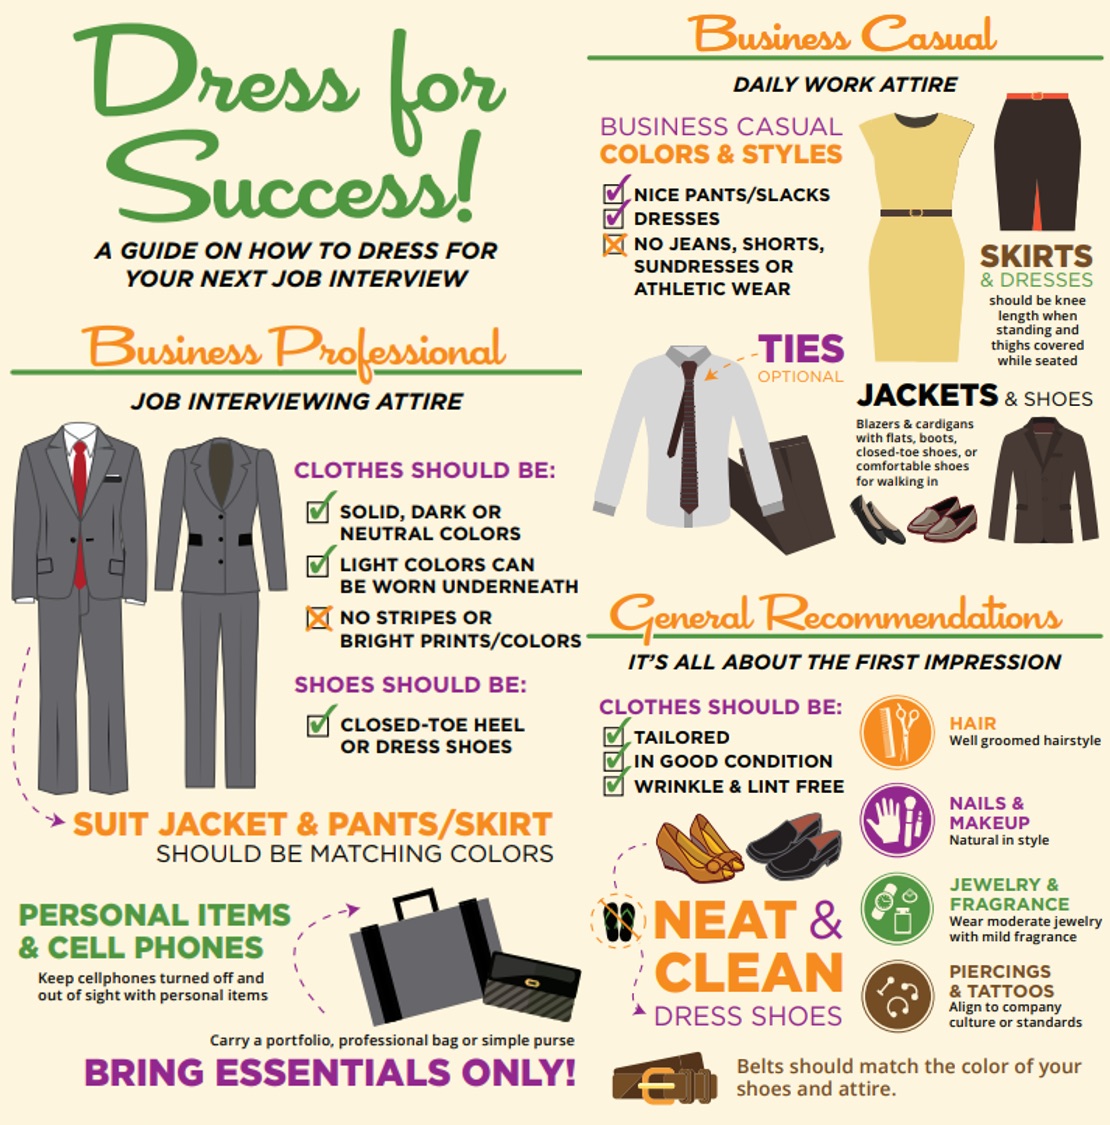 Business Casual for Women: A Guide to Work Attire